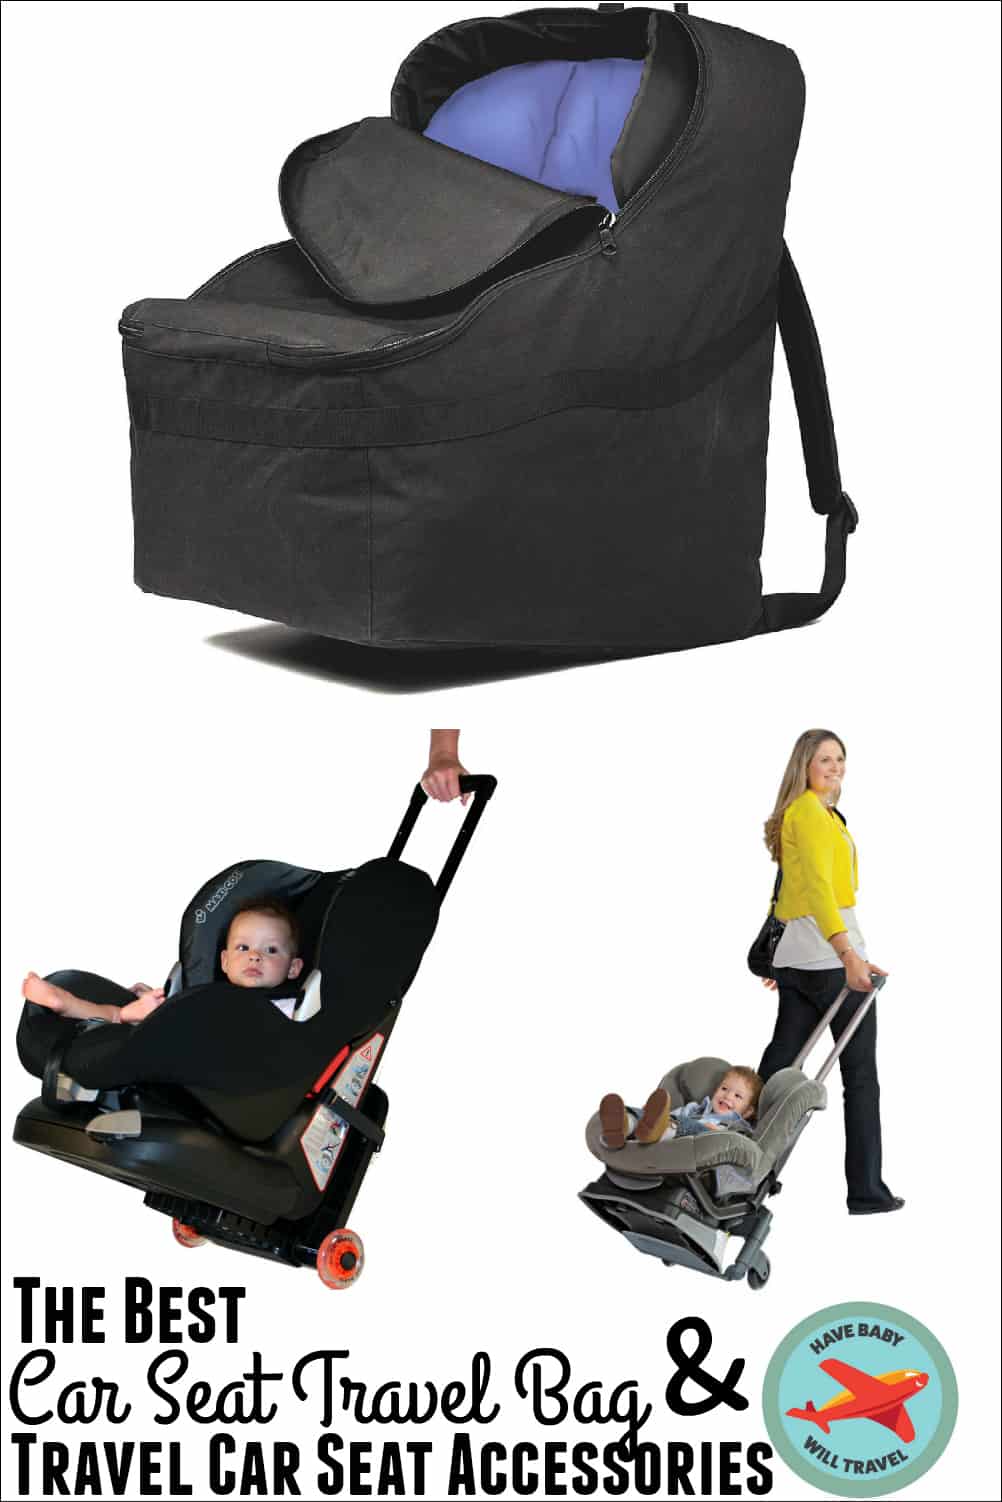 Portable Car Baby Child Safety Seat Bag Cover Travel Storage Dust Bag Waterproof 